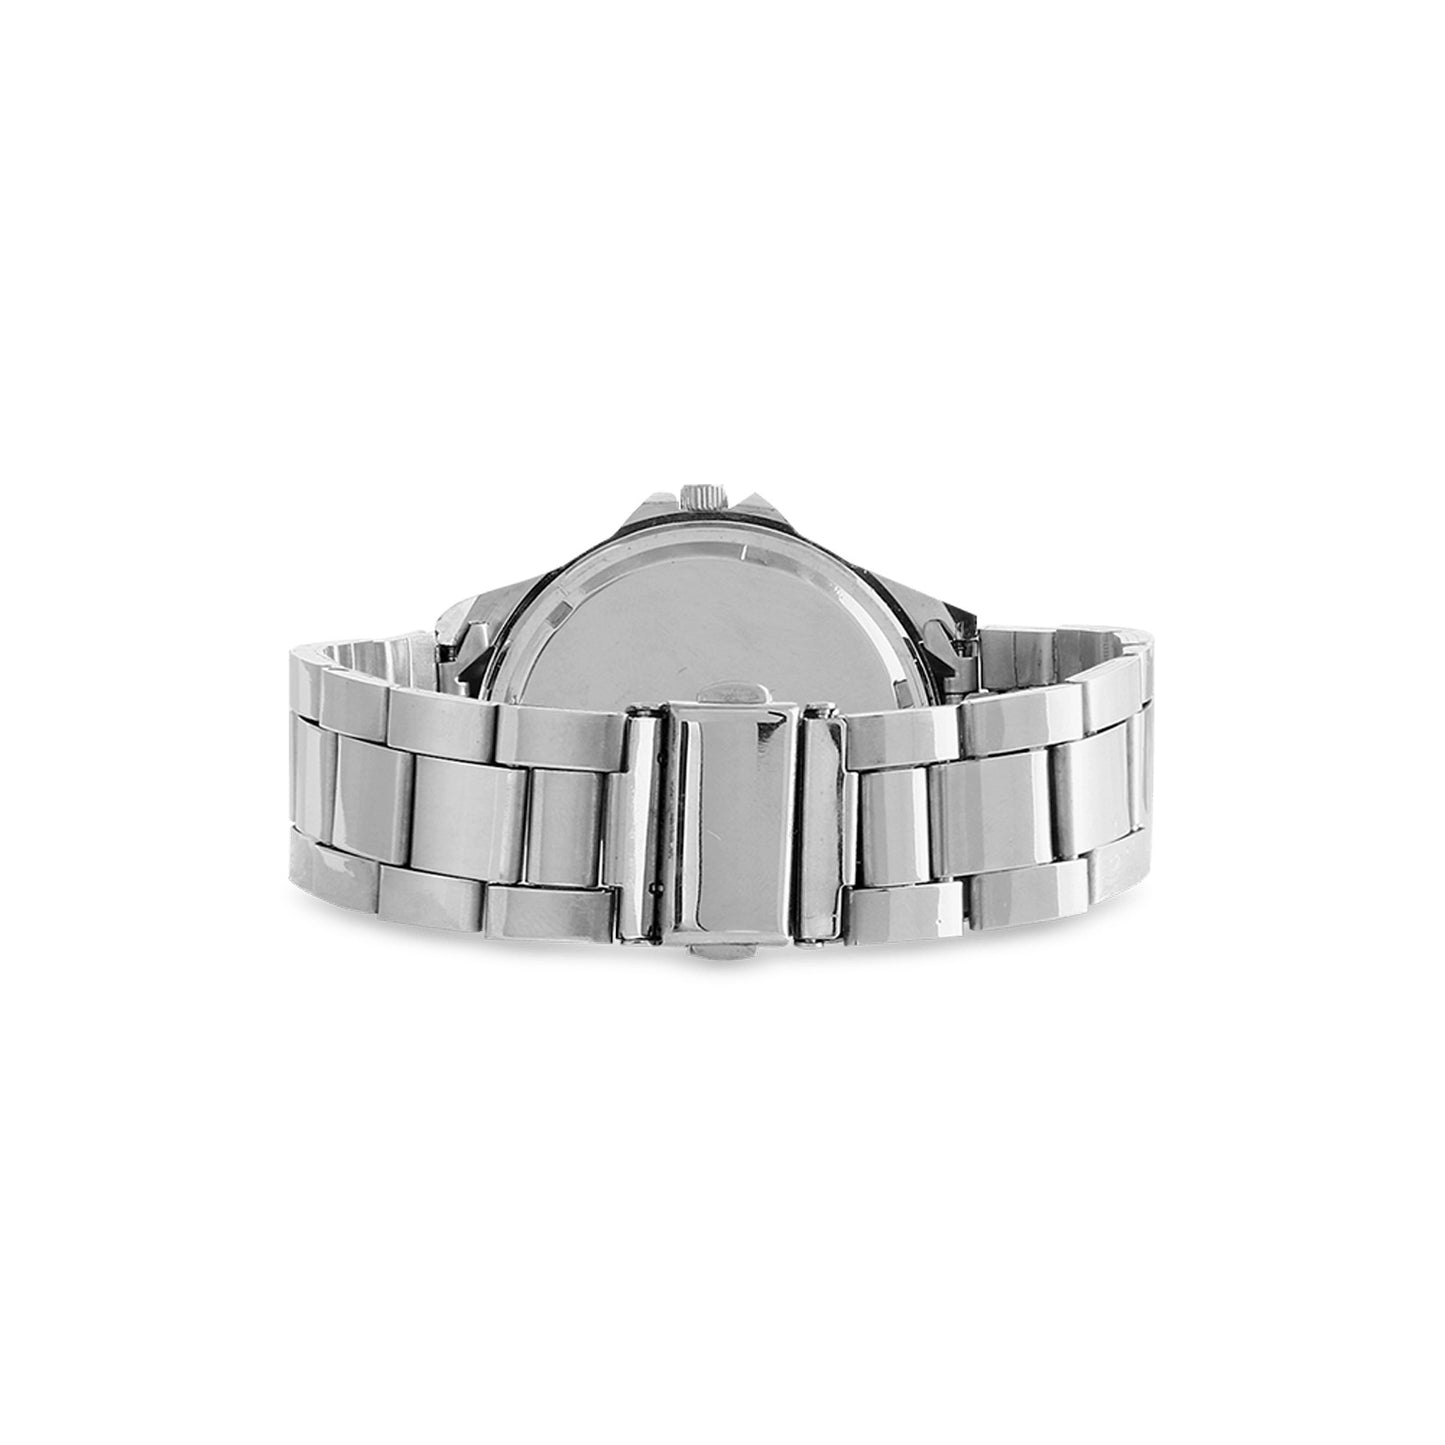 RR Unisex Stainless Steel Watch Forest Green - Add your name.